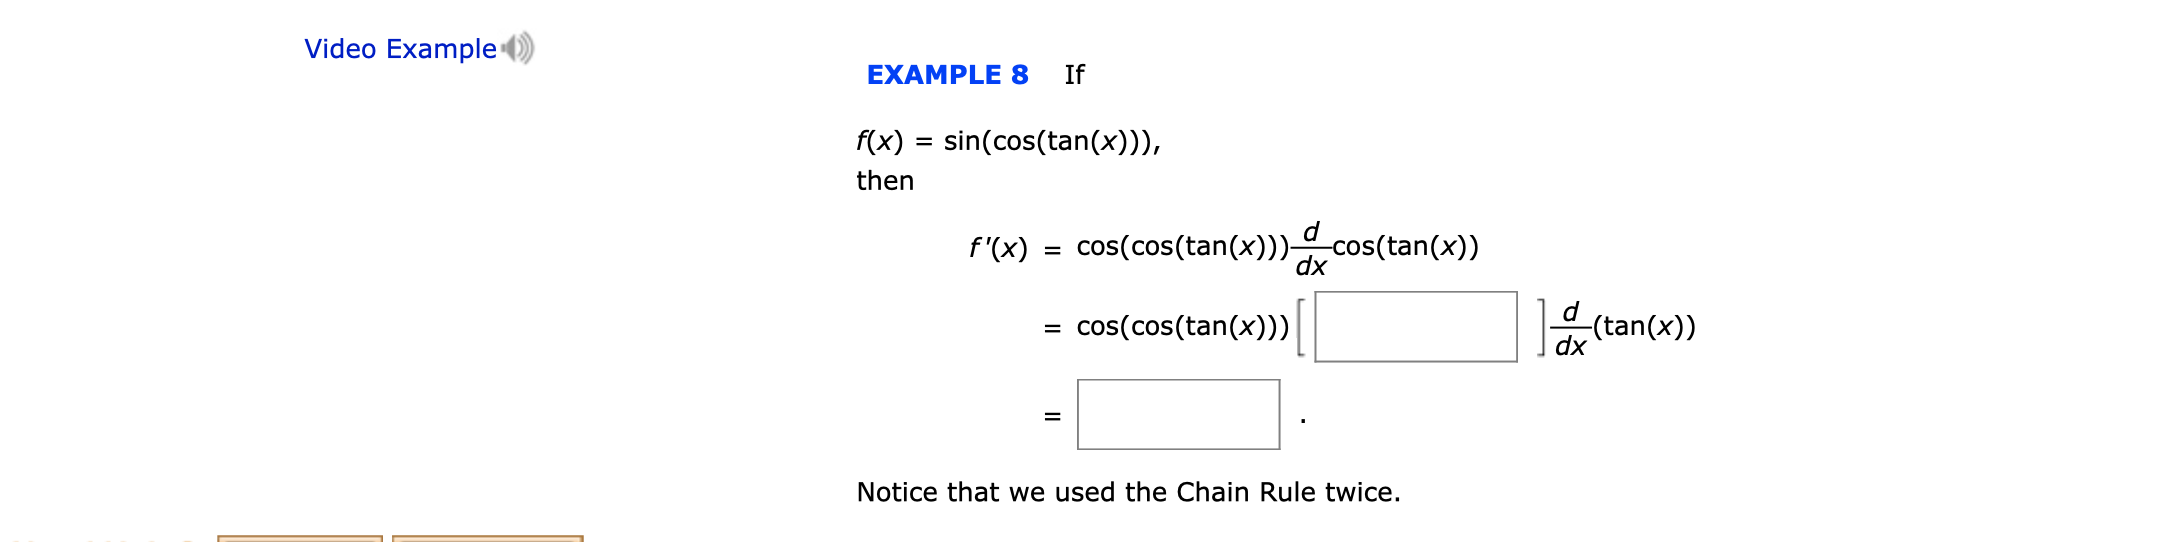 Video Example
EXAMPLE 8
If
f(x) sin(cos(tan(x)))
then
d
f'(x) cos(cos(tan(x)))cos(tan(x))
dx
d
(tan(x))
cos(cos(tan(x)))
dx
Notice that we used the Chain Rule twice.
